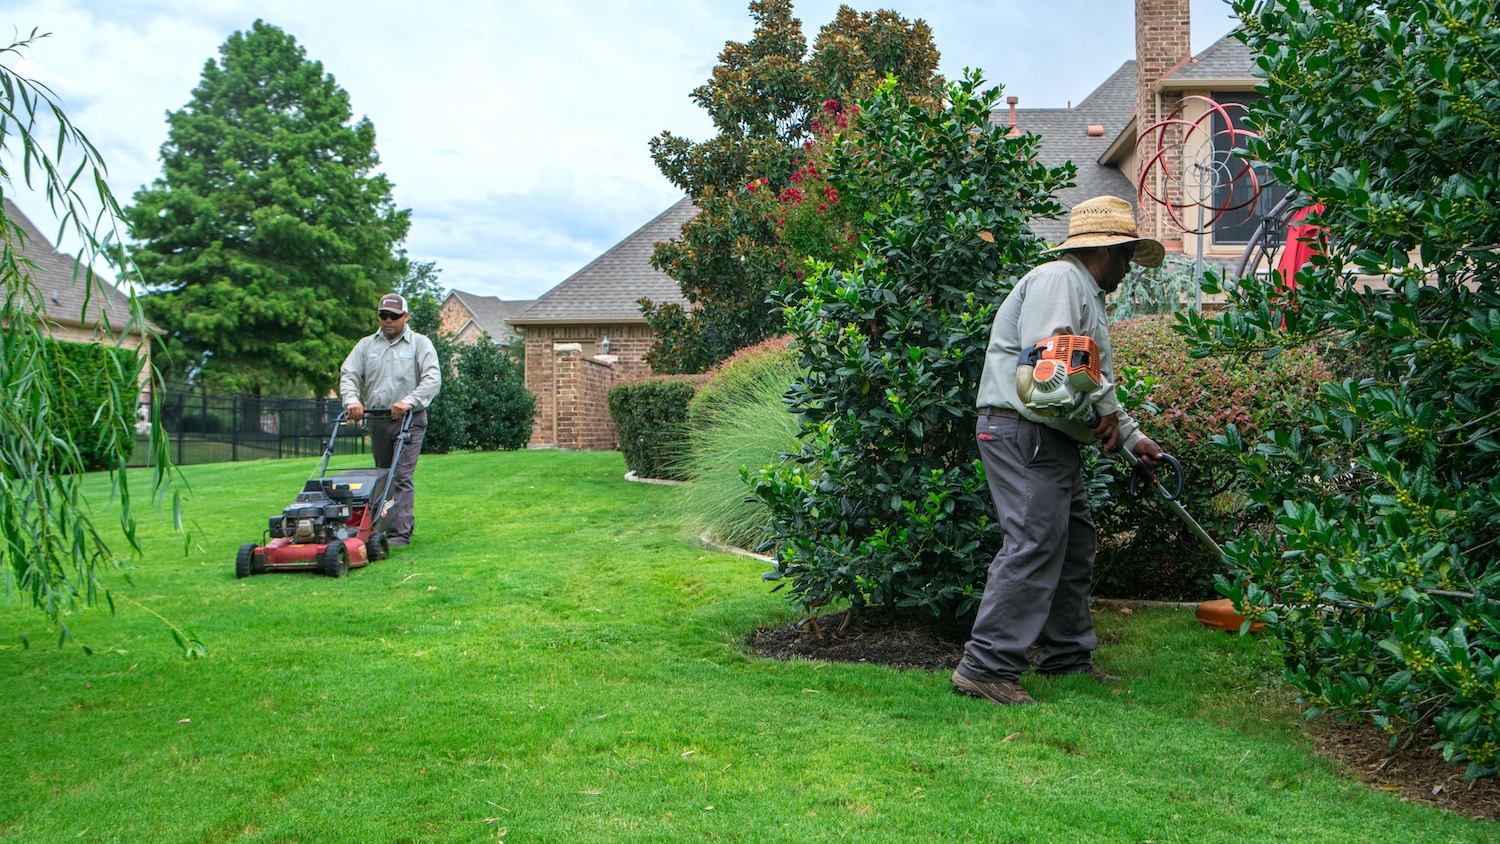 Lawn Care Landscaping Workers, How Much Should A Landscaper Get Paid